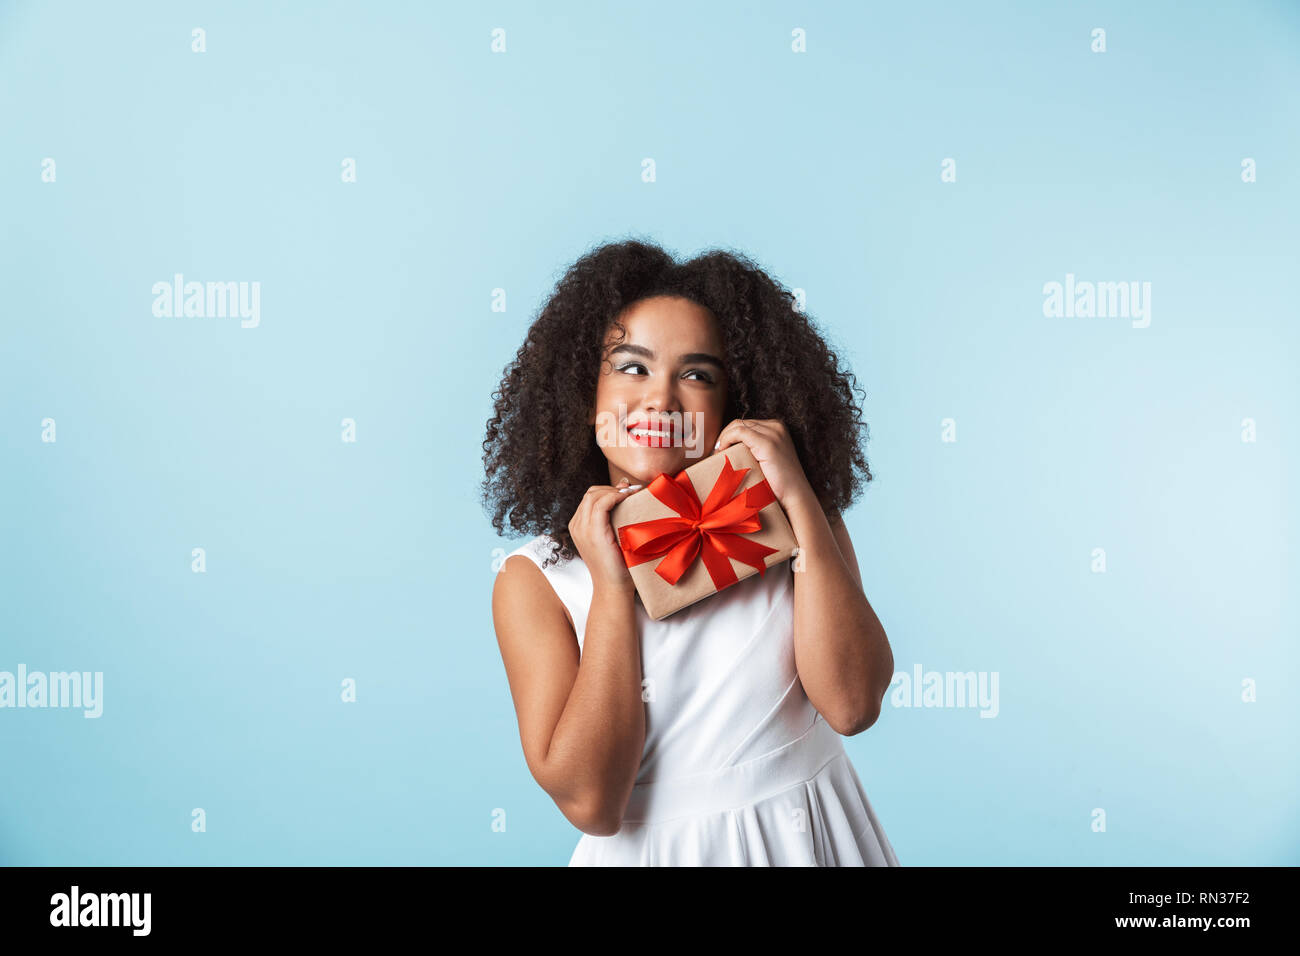 Cheerful young african woman wearing dress celebrating isolated, holding present box Stock Photo